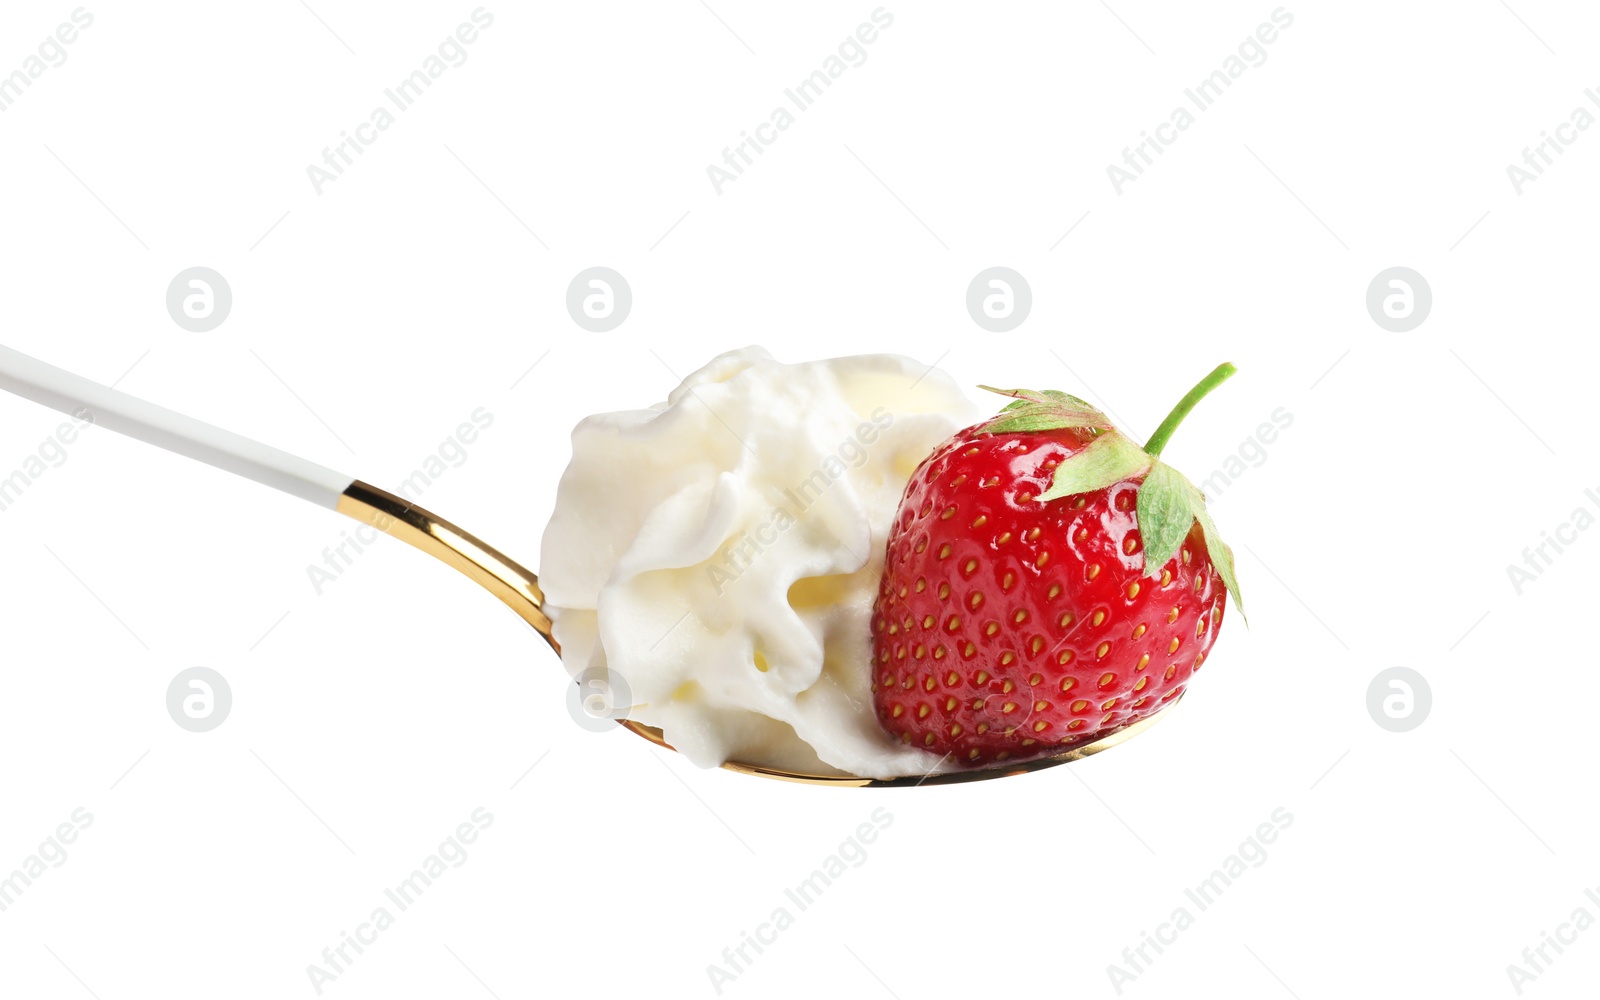 Photo of Spoon with delicious strawberry and whipped cream isolated on white